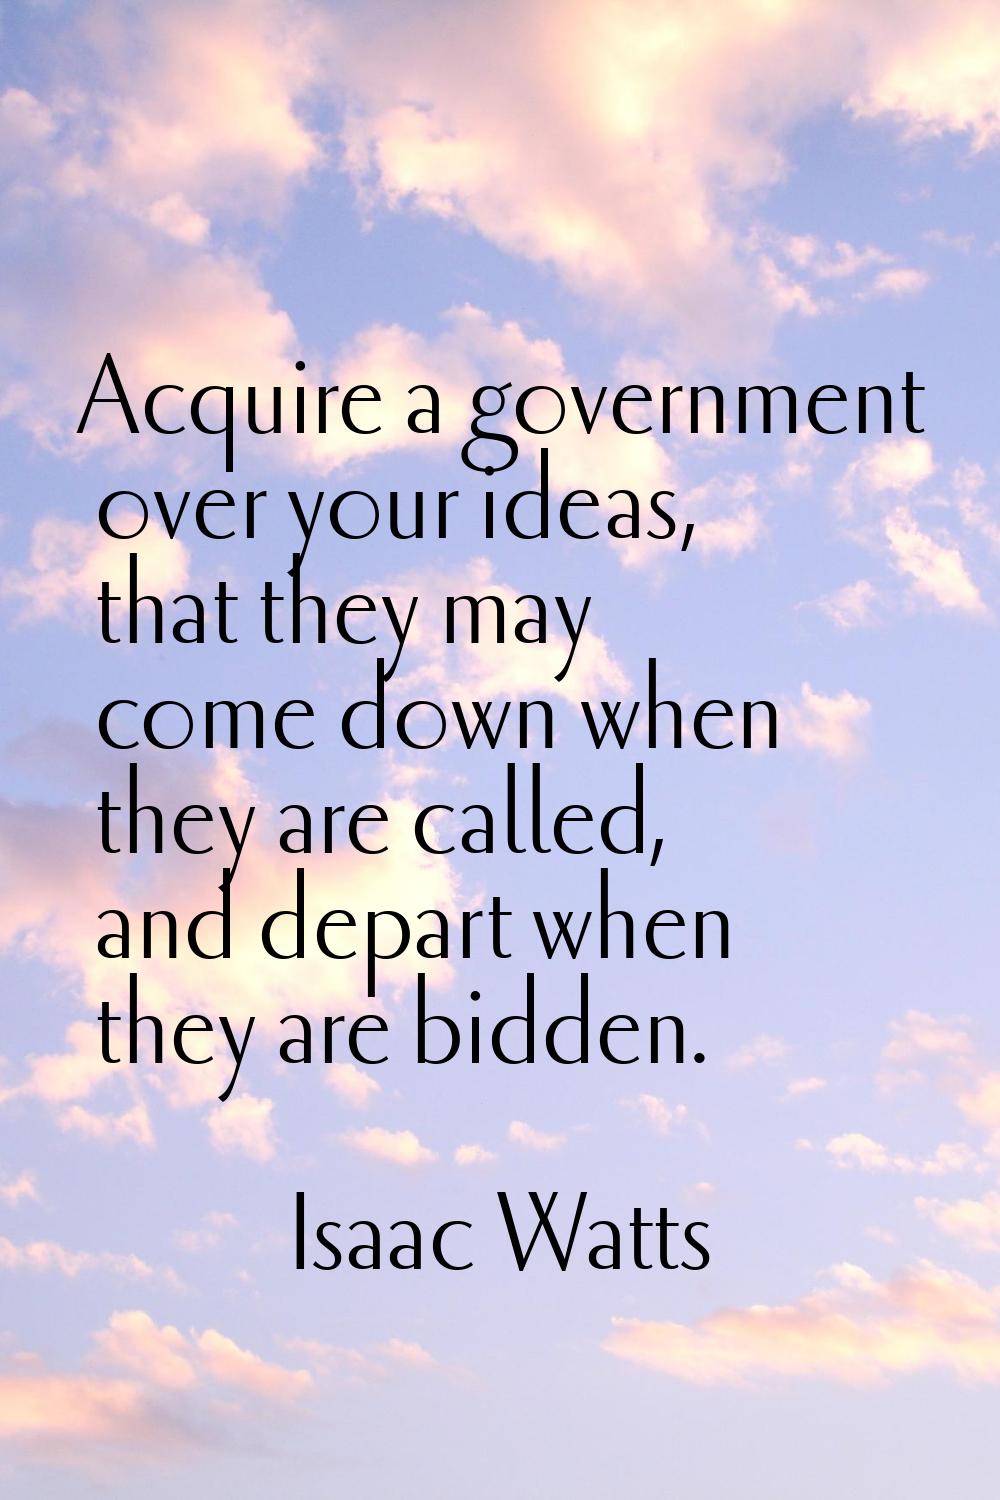 Acquire a government over your ideas, that they may come down when they are called, and depart when